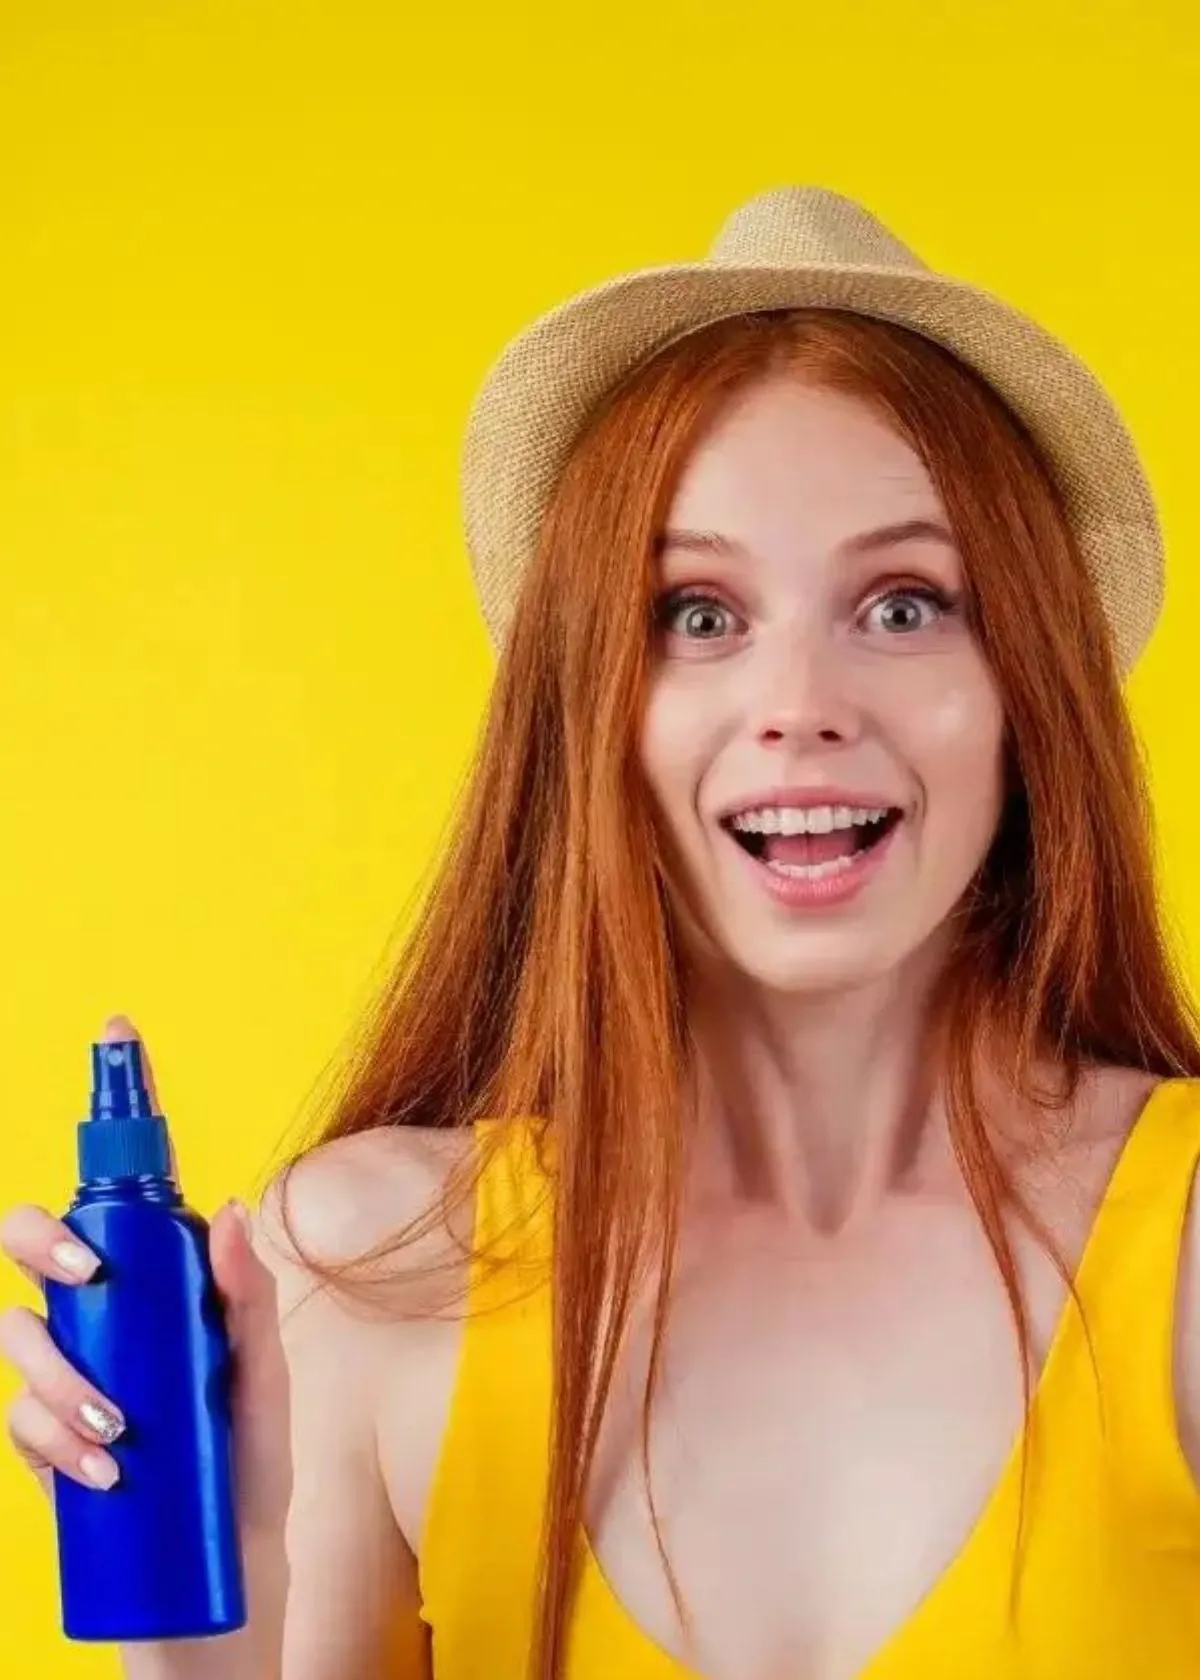 Why do you Choose the Sunscreen for Redheads?